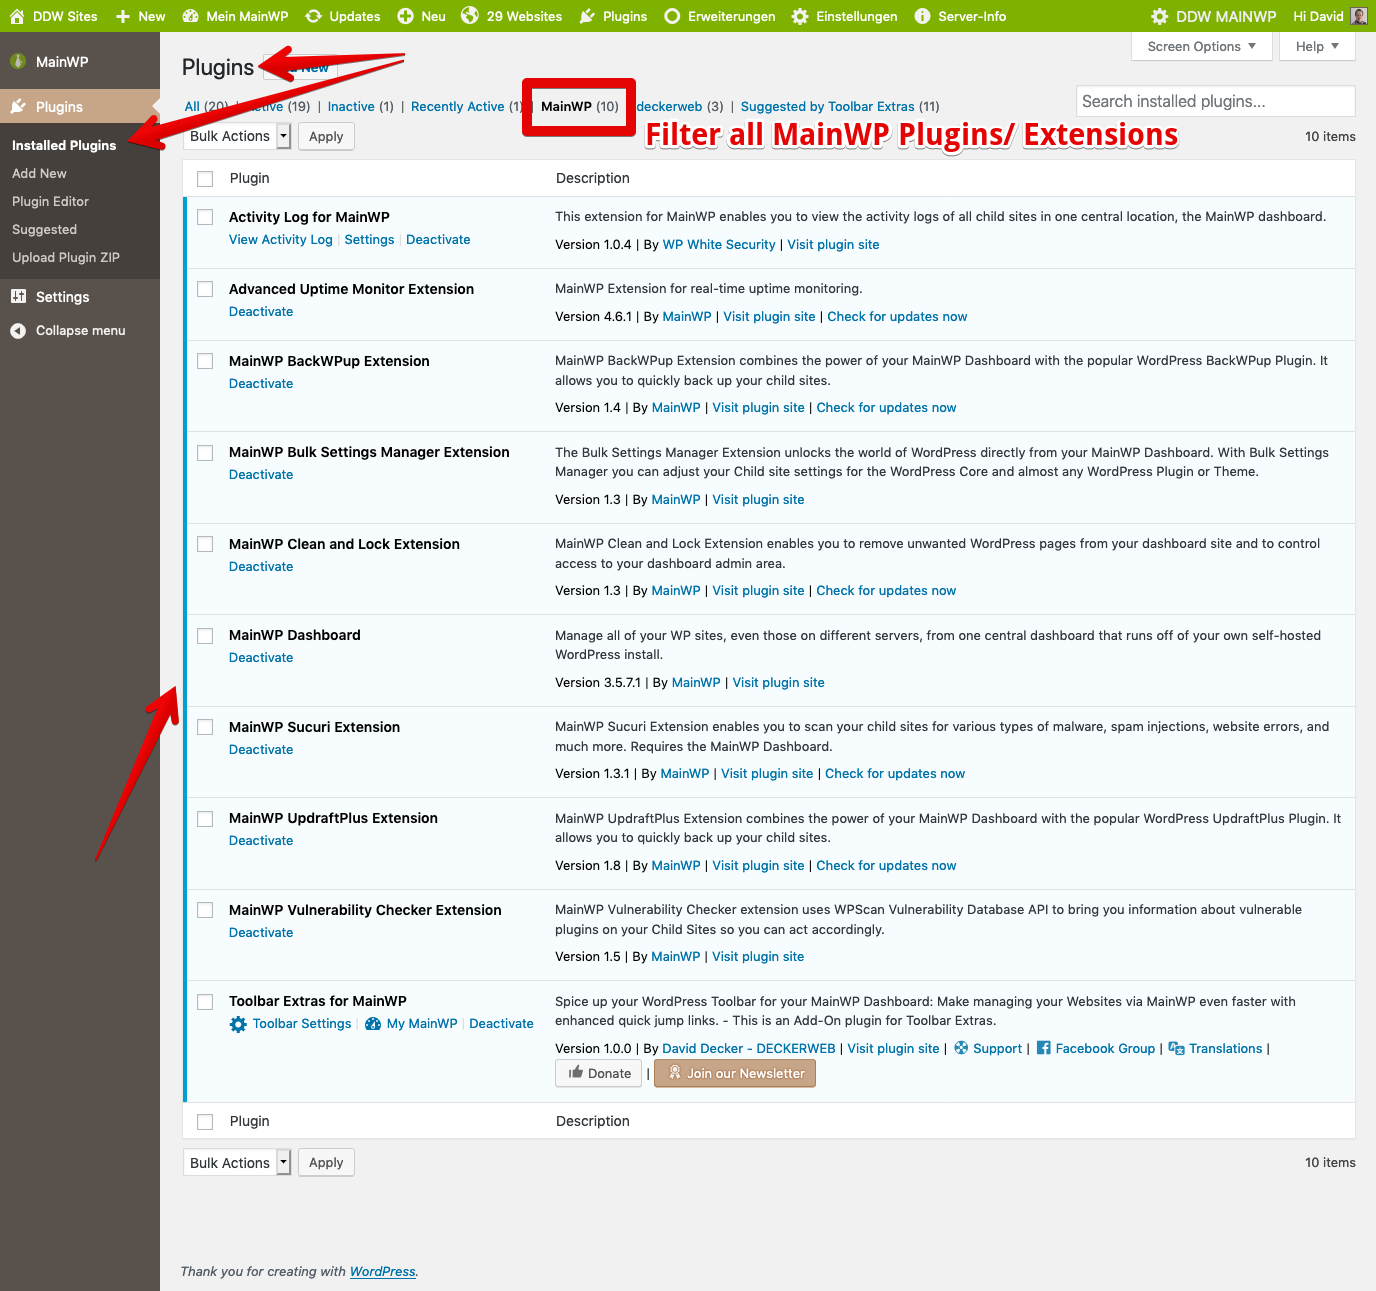 Filter all MainWP Plugins/ Extensions on WordPress' Plugins page